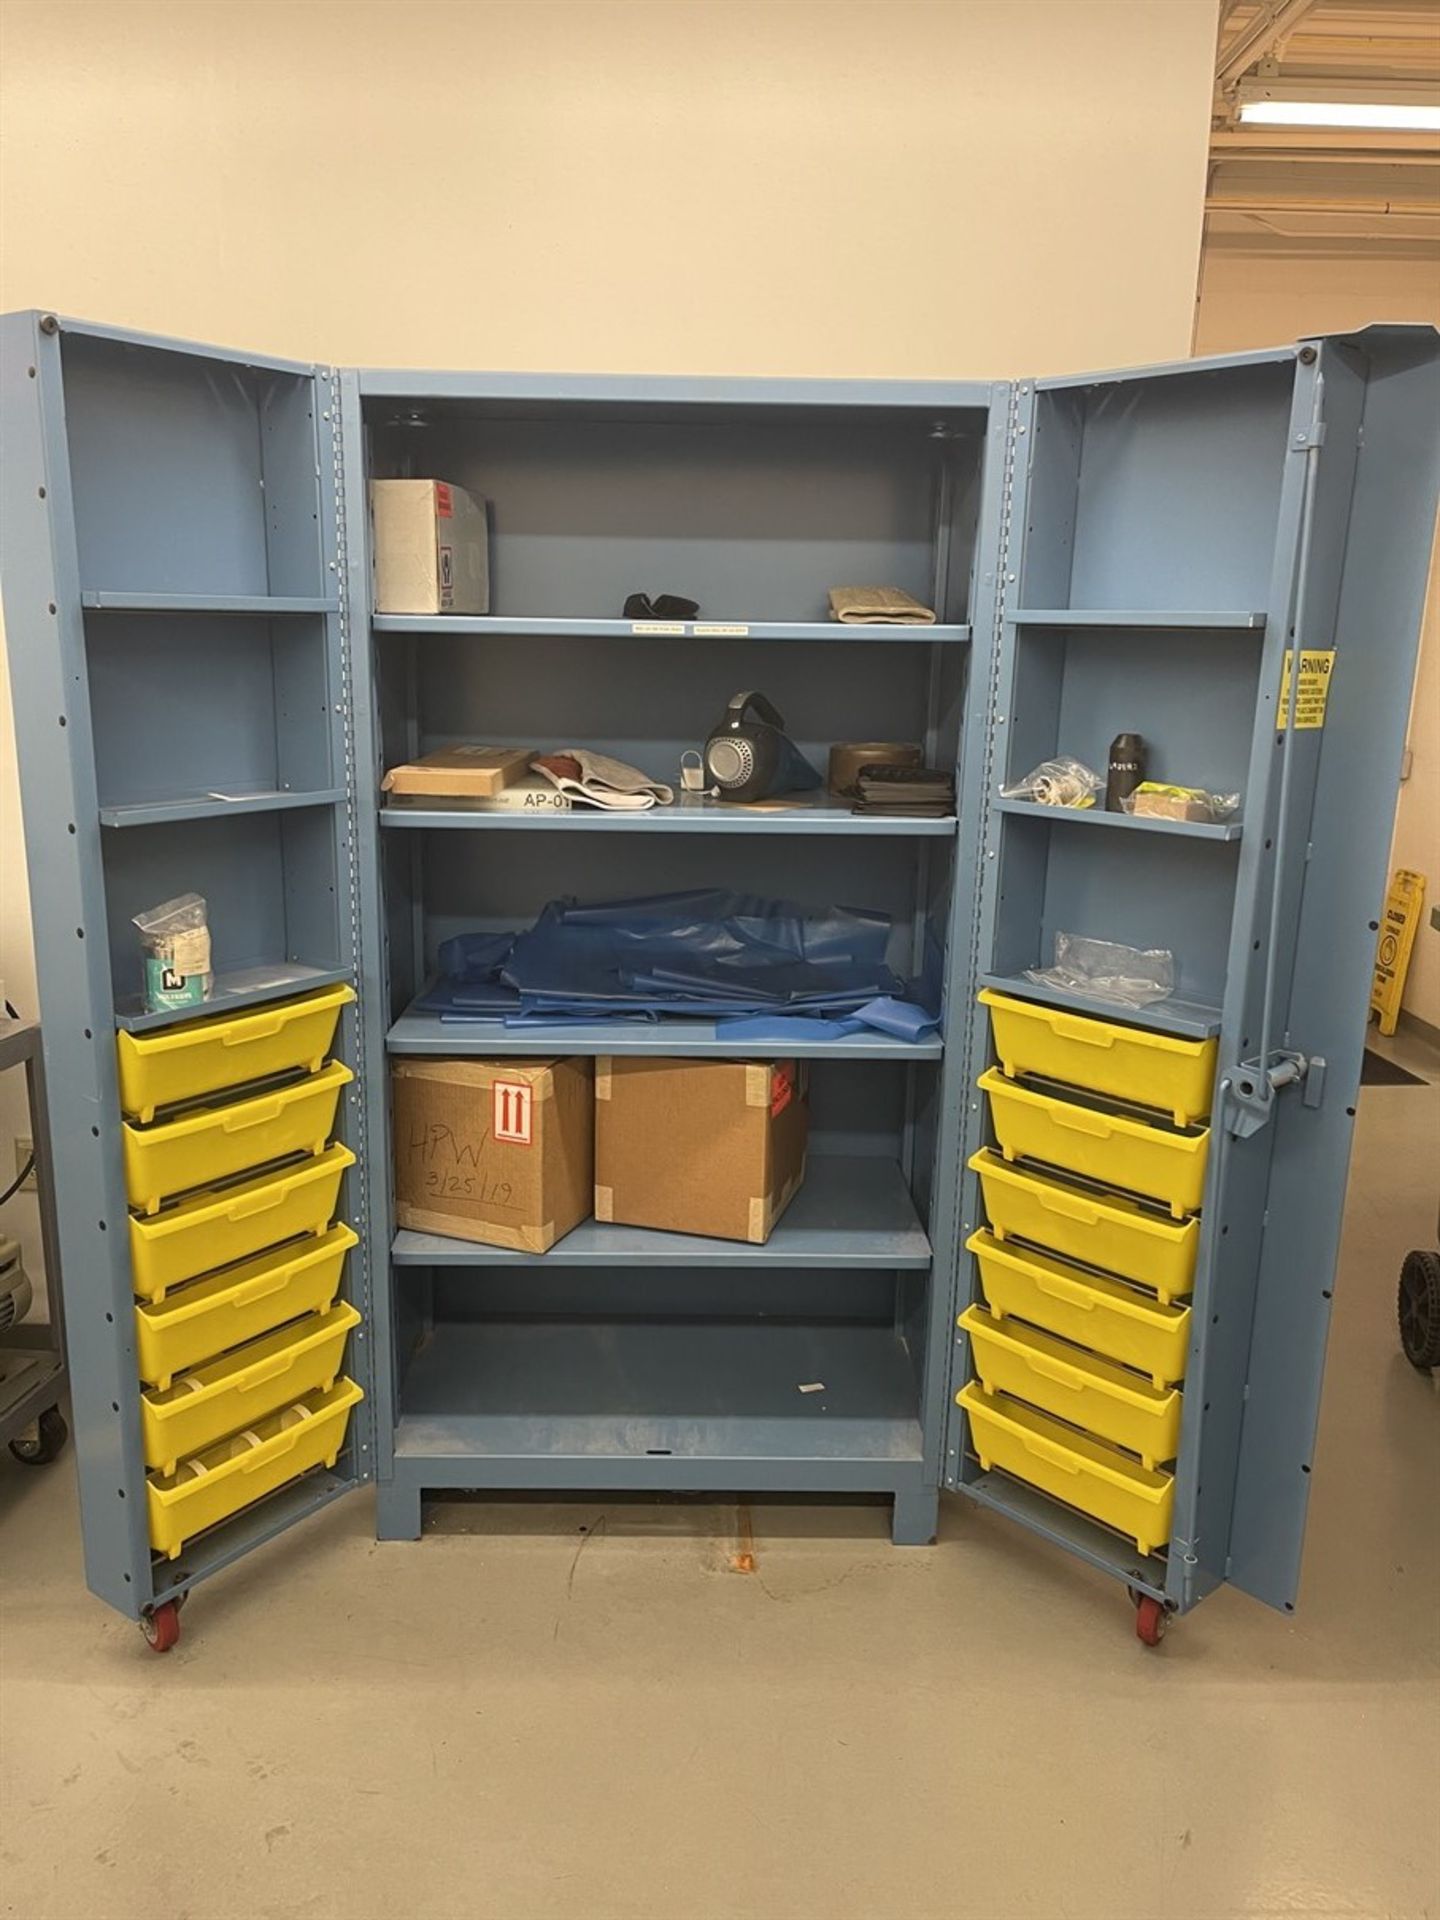 LYON Heavy Duty Shop Cabinet, (Test Cell Building) - Image 2 of 2